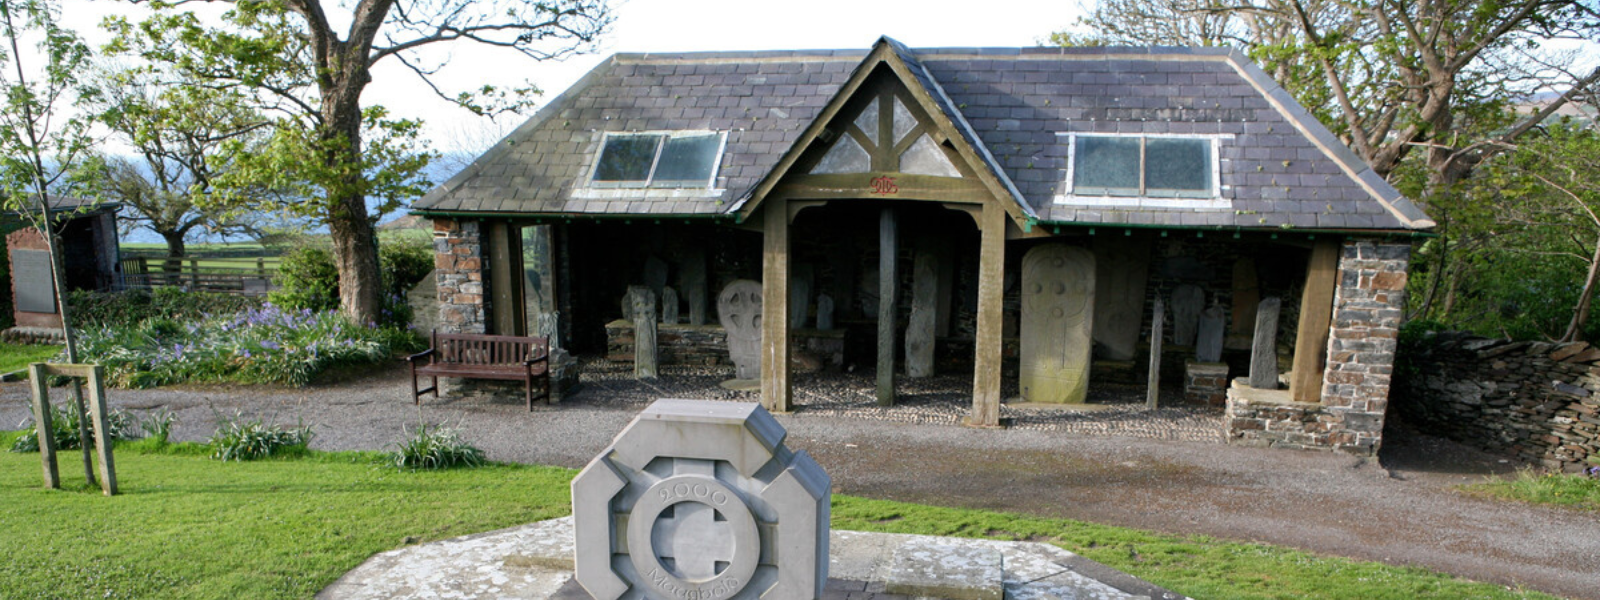 Maughold Cross House